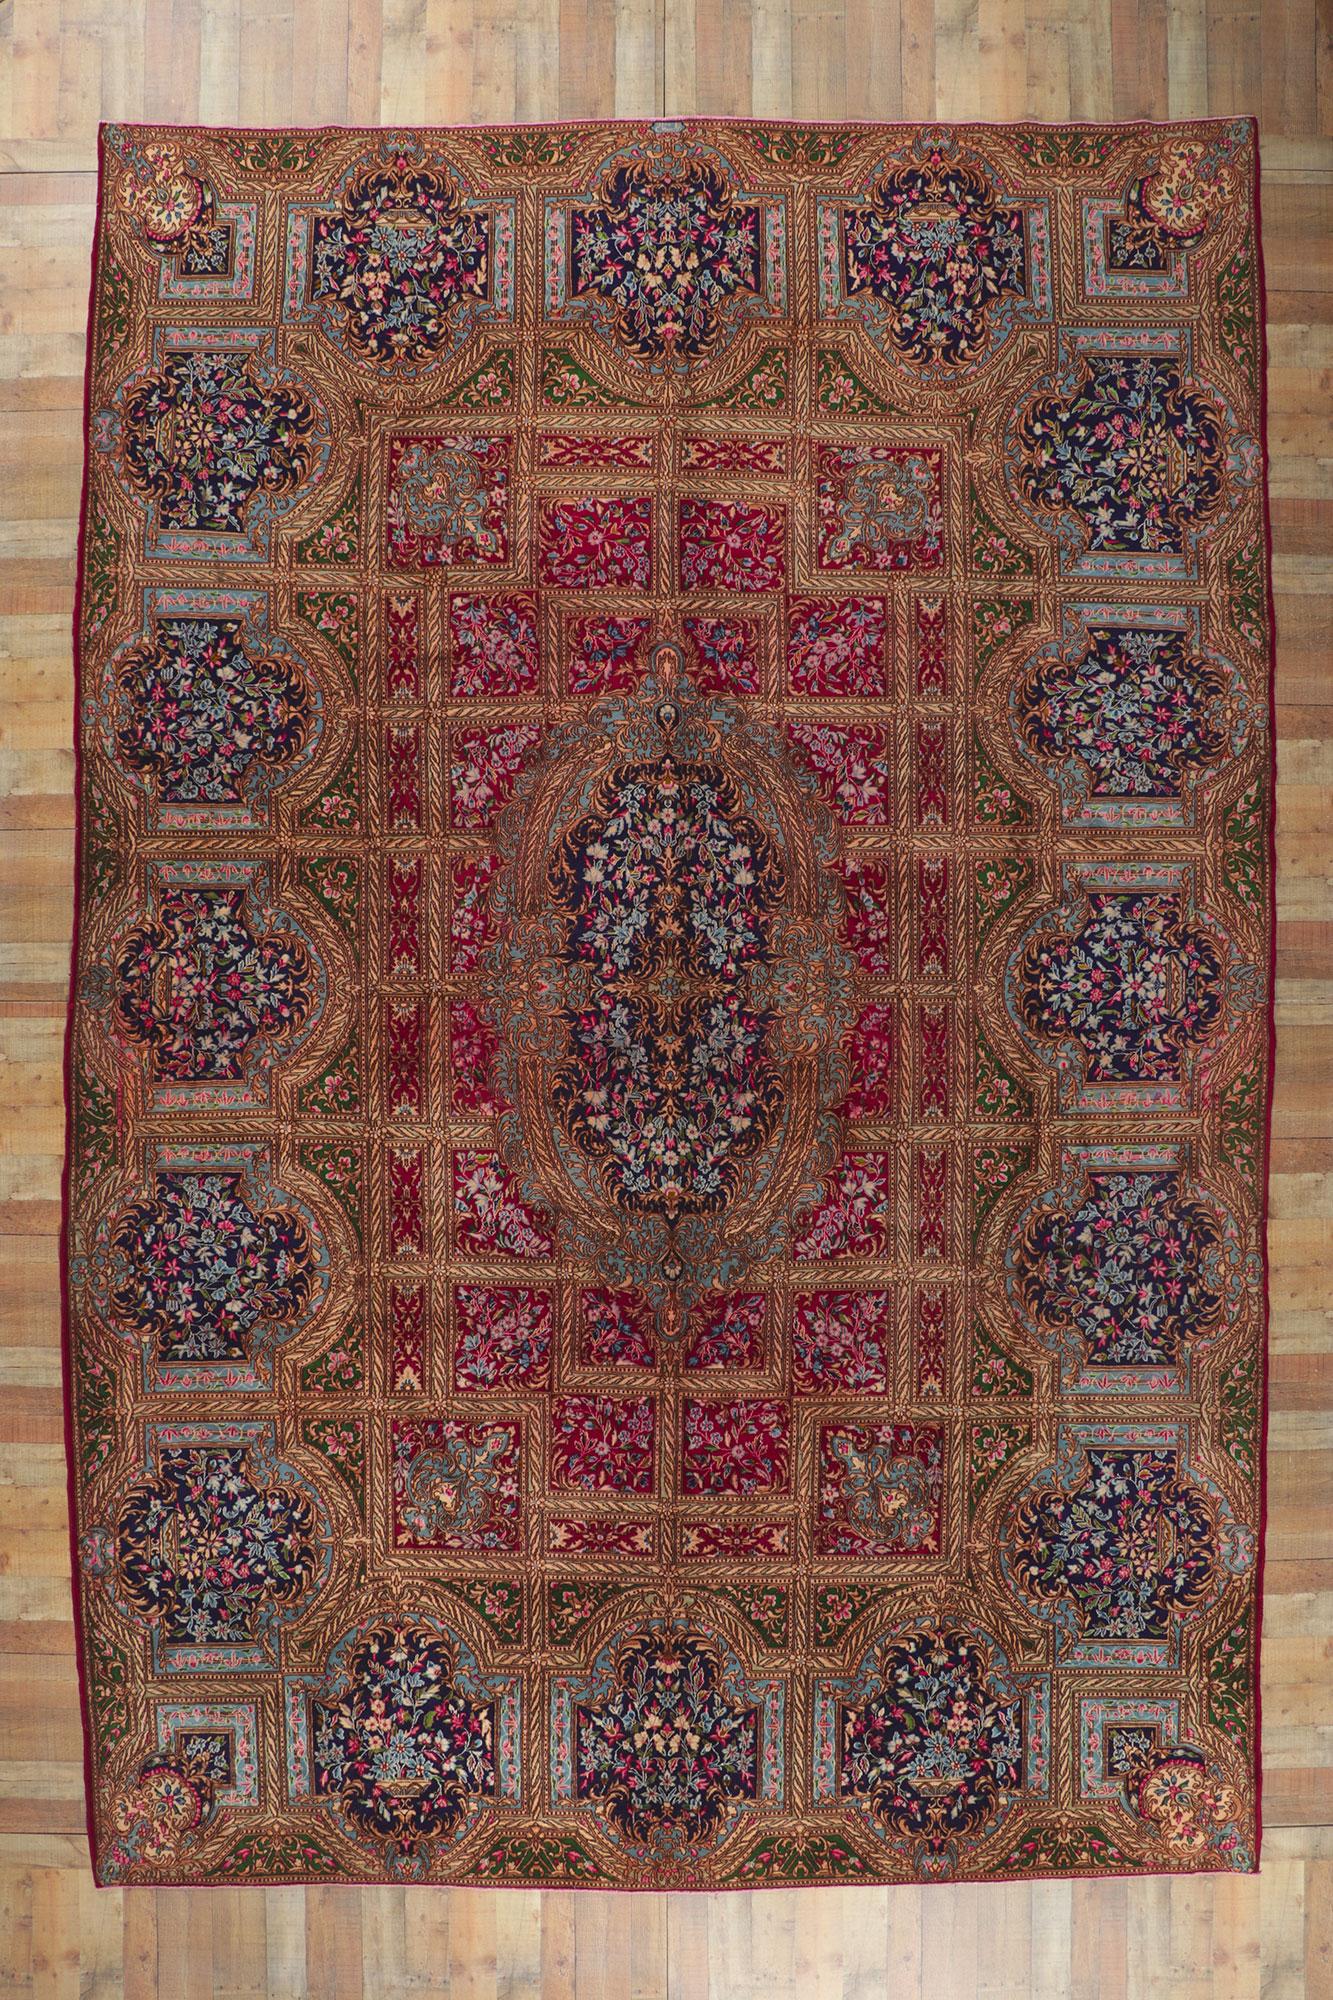 Vintage Persian Kerman Rug Hotel Lobby Size Carpet Decadent French Style In Good Condition For Sale In Dallas, TX